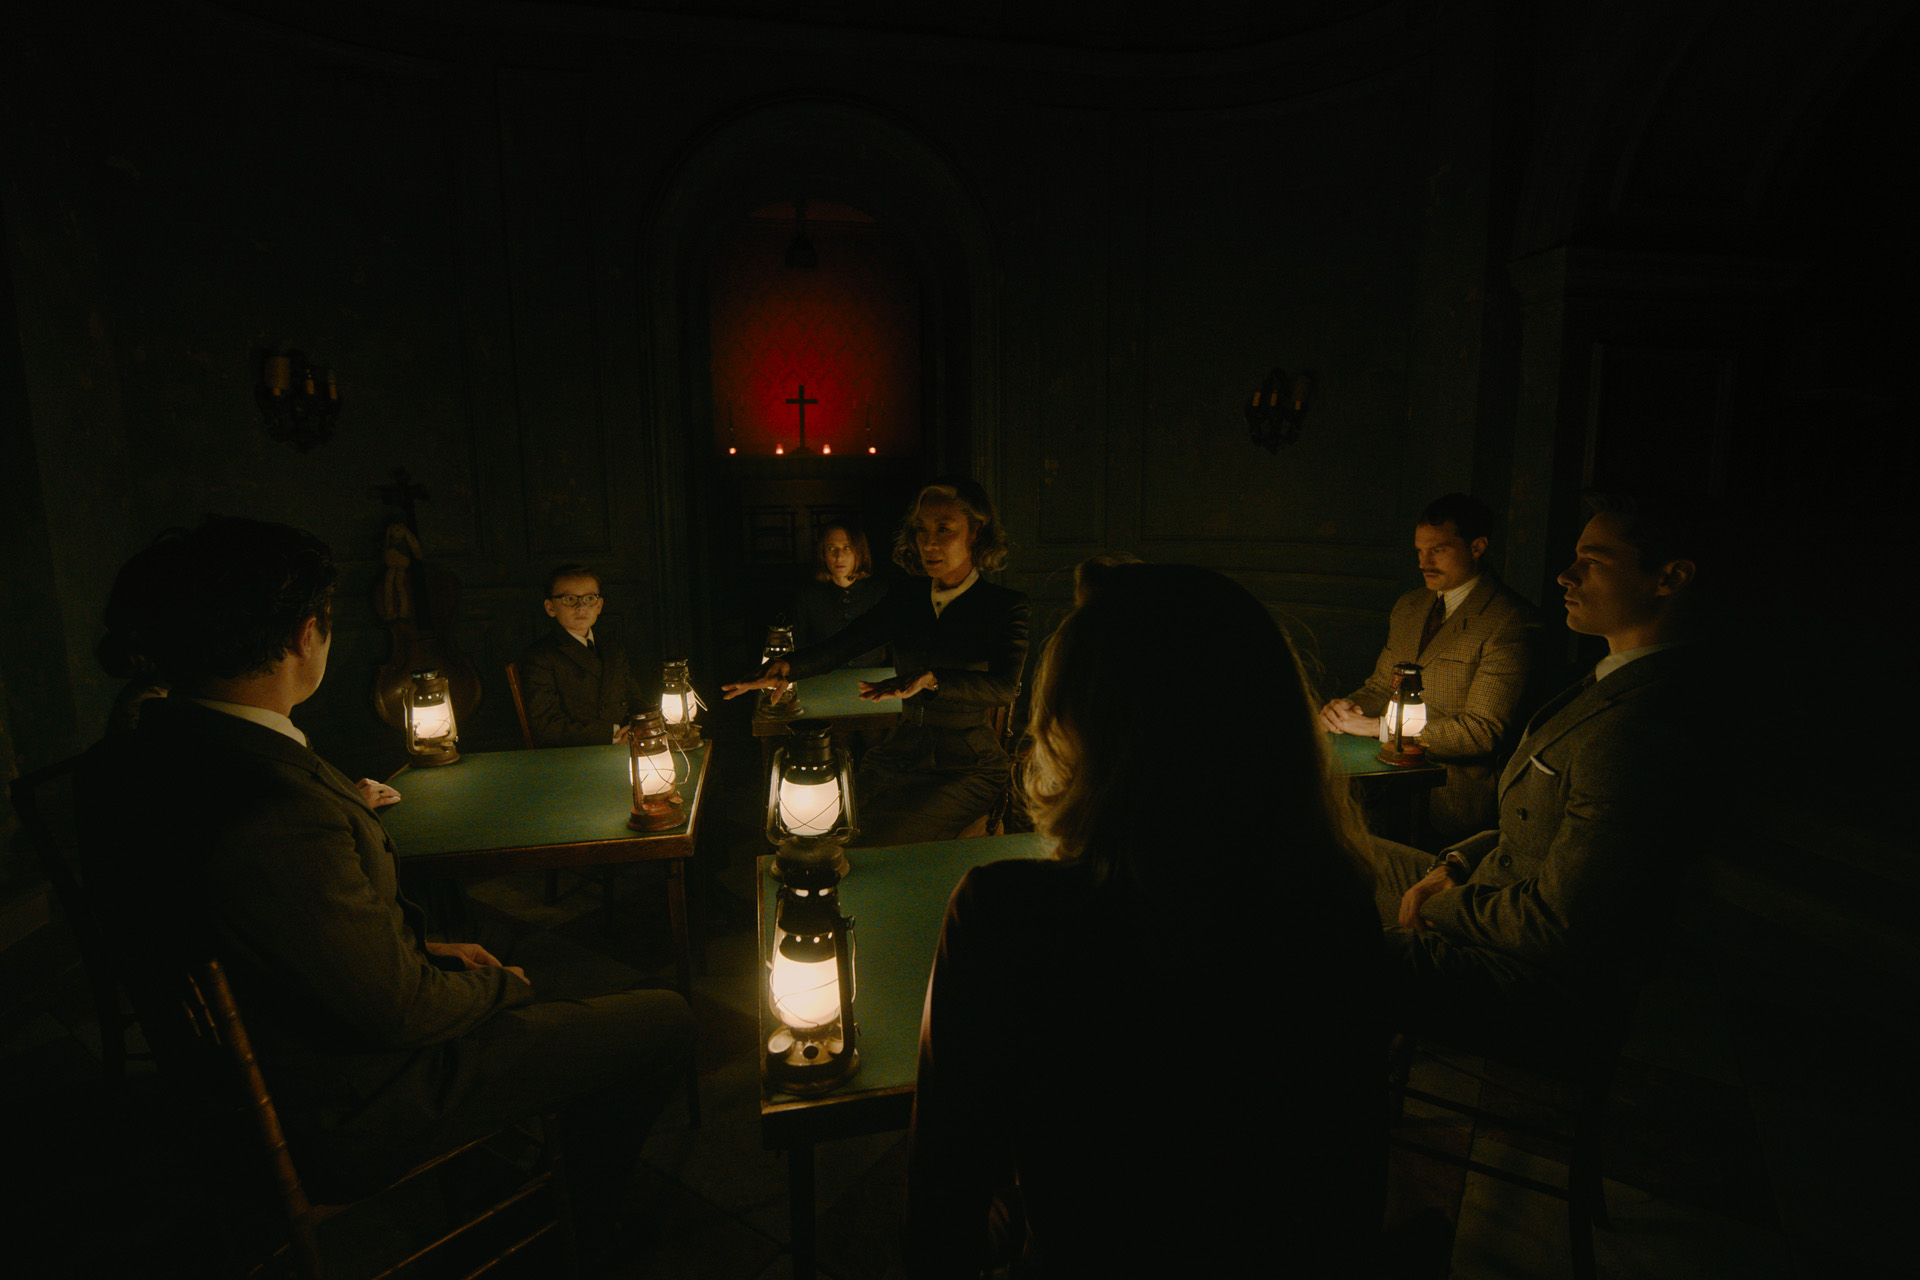 (Facing front, L-R): Jude Hill as Leopold Ferrier, Camille Cottin as Olga Seminoff, Michelle Yeoh as Mrs. Reynolds, Jamie Dornan as Dr. Leslie Ferrier, and Kyle Allen as Maxime Gerard in 20th Century Studios' A HAUNTING IN VENICE